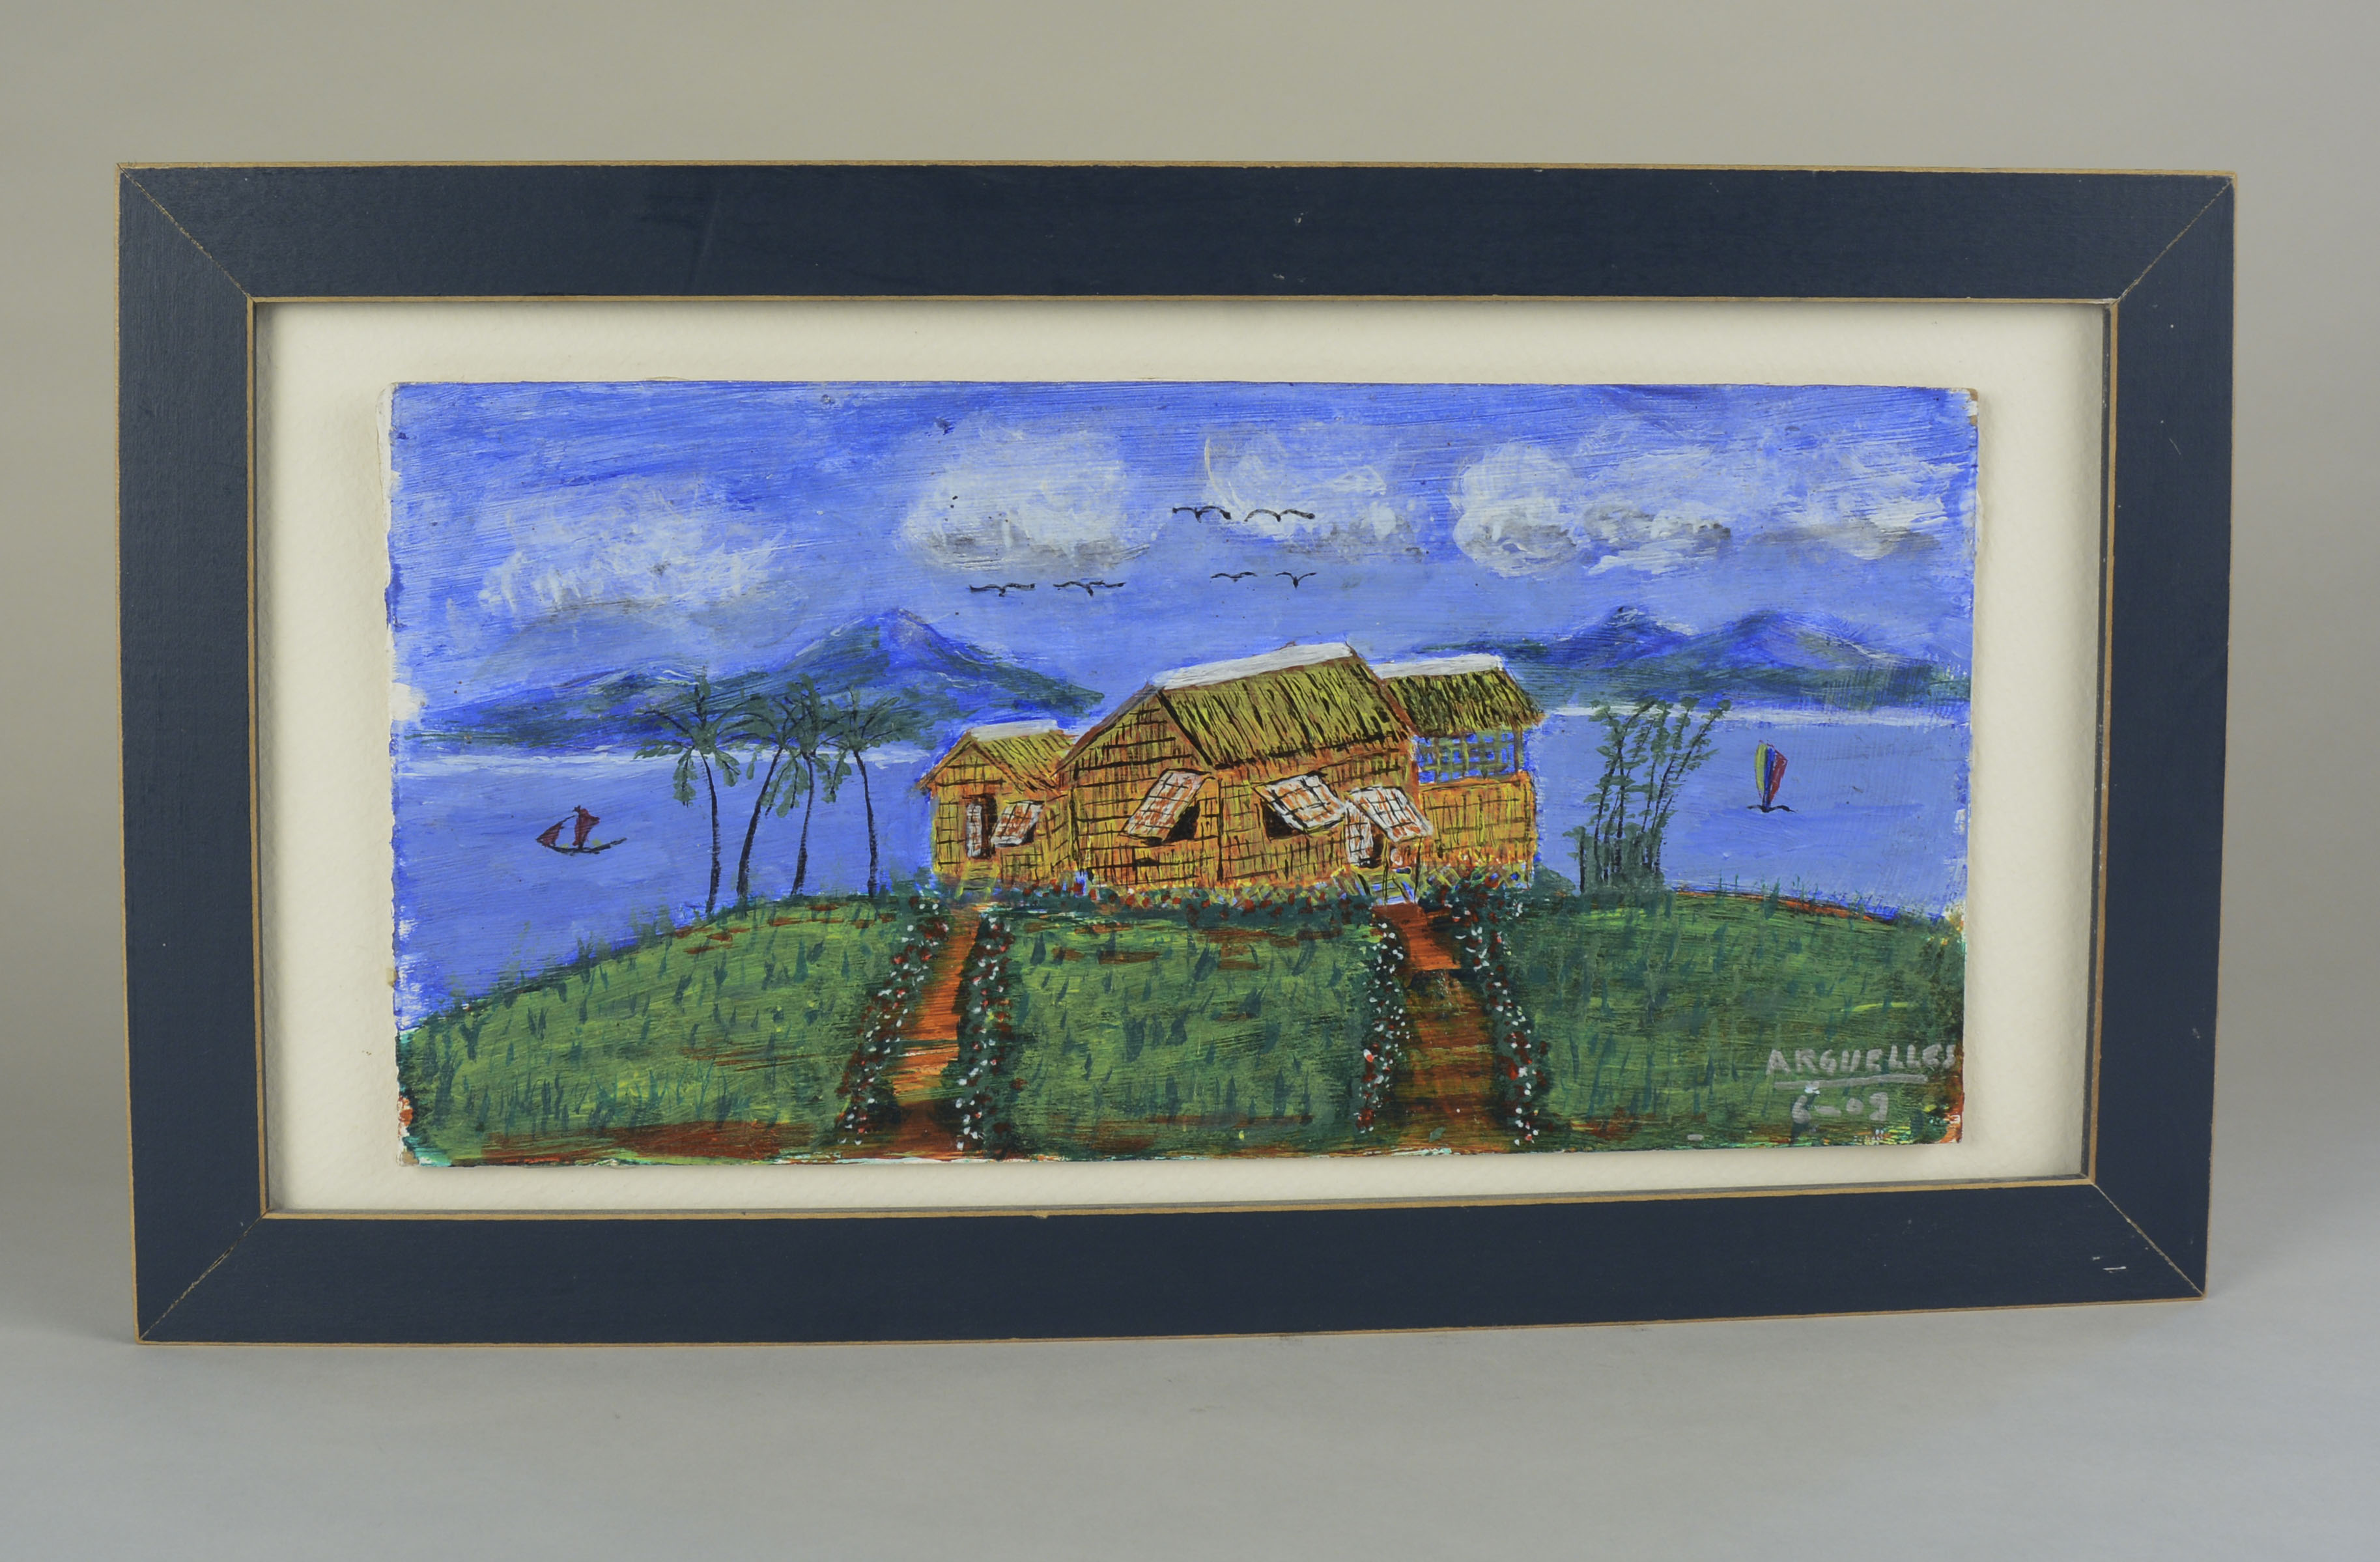 Painting owned by Magdalena Arguelles.The painting was made in 2009 in Chicago. Arguelles said her father Jose made it from memory at the age of 78. He was not a trained artist. Arguelles’ father gave her the painting as a gift. The painting depicts an island off of Iloilocalled Nasidman Island, which is part of Ajuy, Iloilo. It is a private homesteaded island. The painting is signed “Arguelles 2009”. Arguelles said the painting is important because it is where she comes from. Any views, findings, conclusions, or recommendations expressed in this story do not necessarily represent those of the National Endowment for the Humanities. (c) Field Museum of Natural History - CC BY-NC 4.0